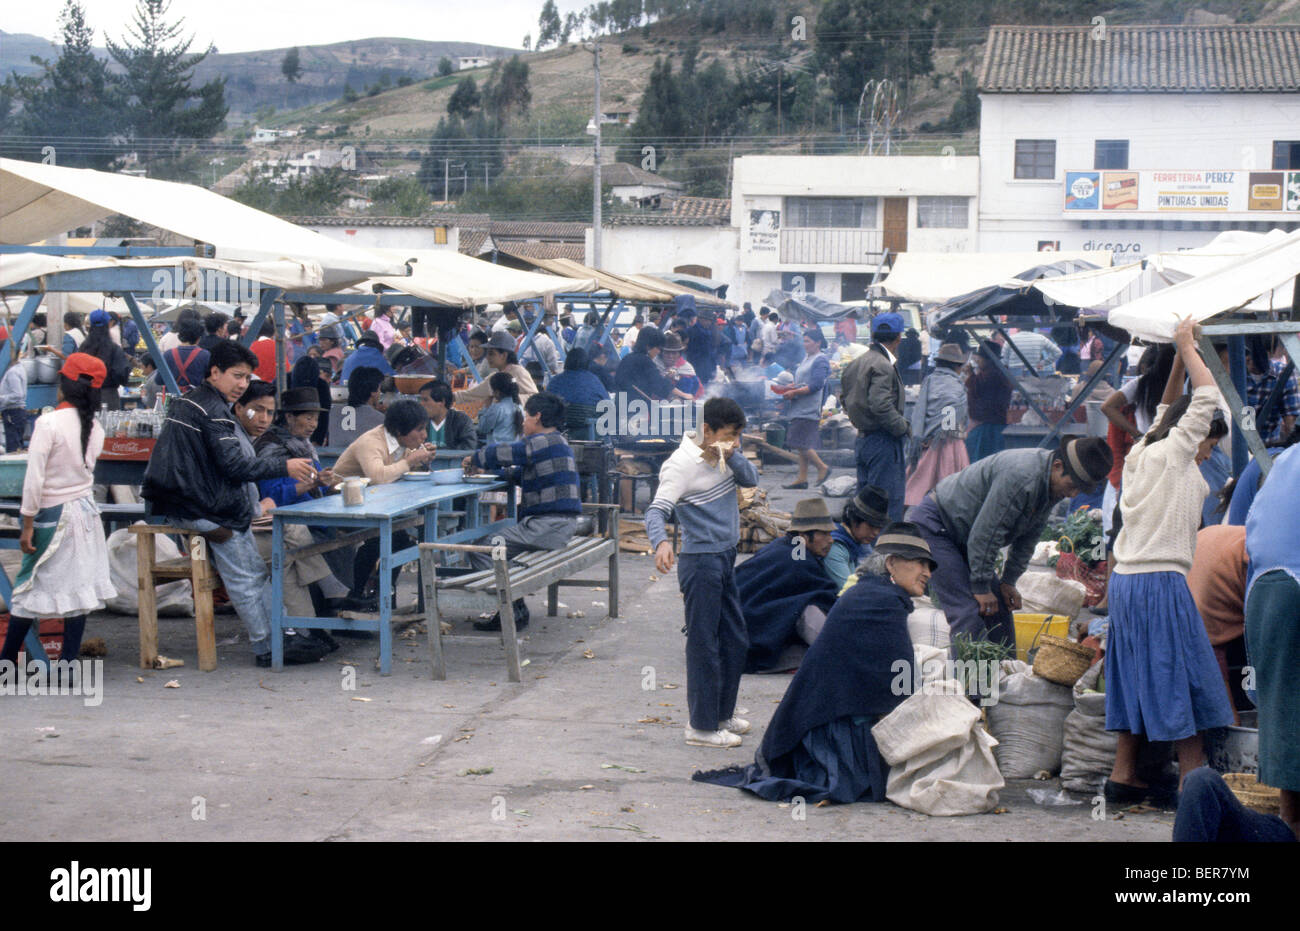 View over cooked food portion of market with smoke billowing from several stalls. Ecuador highlands local market Stock Photo